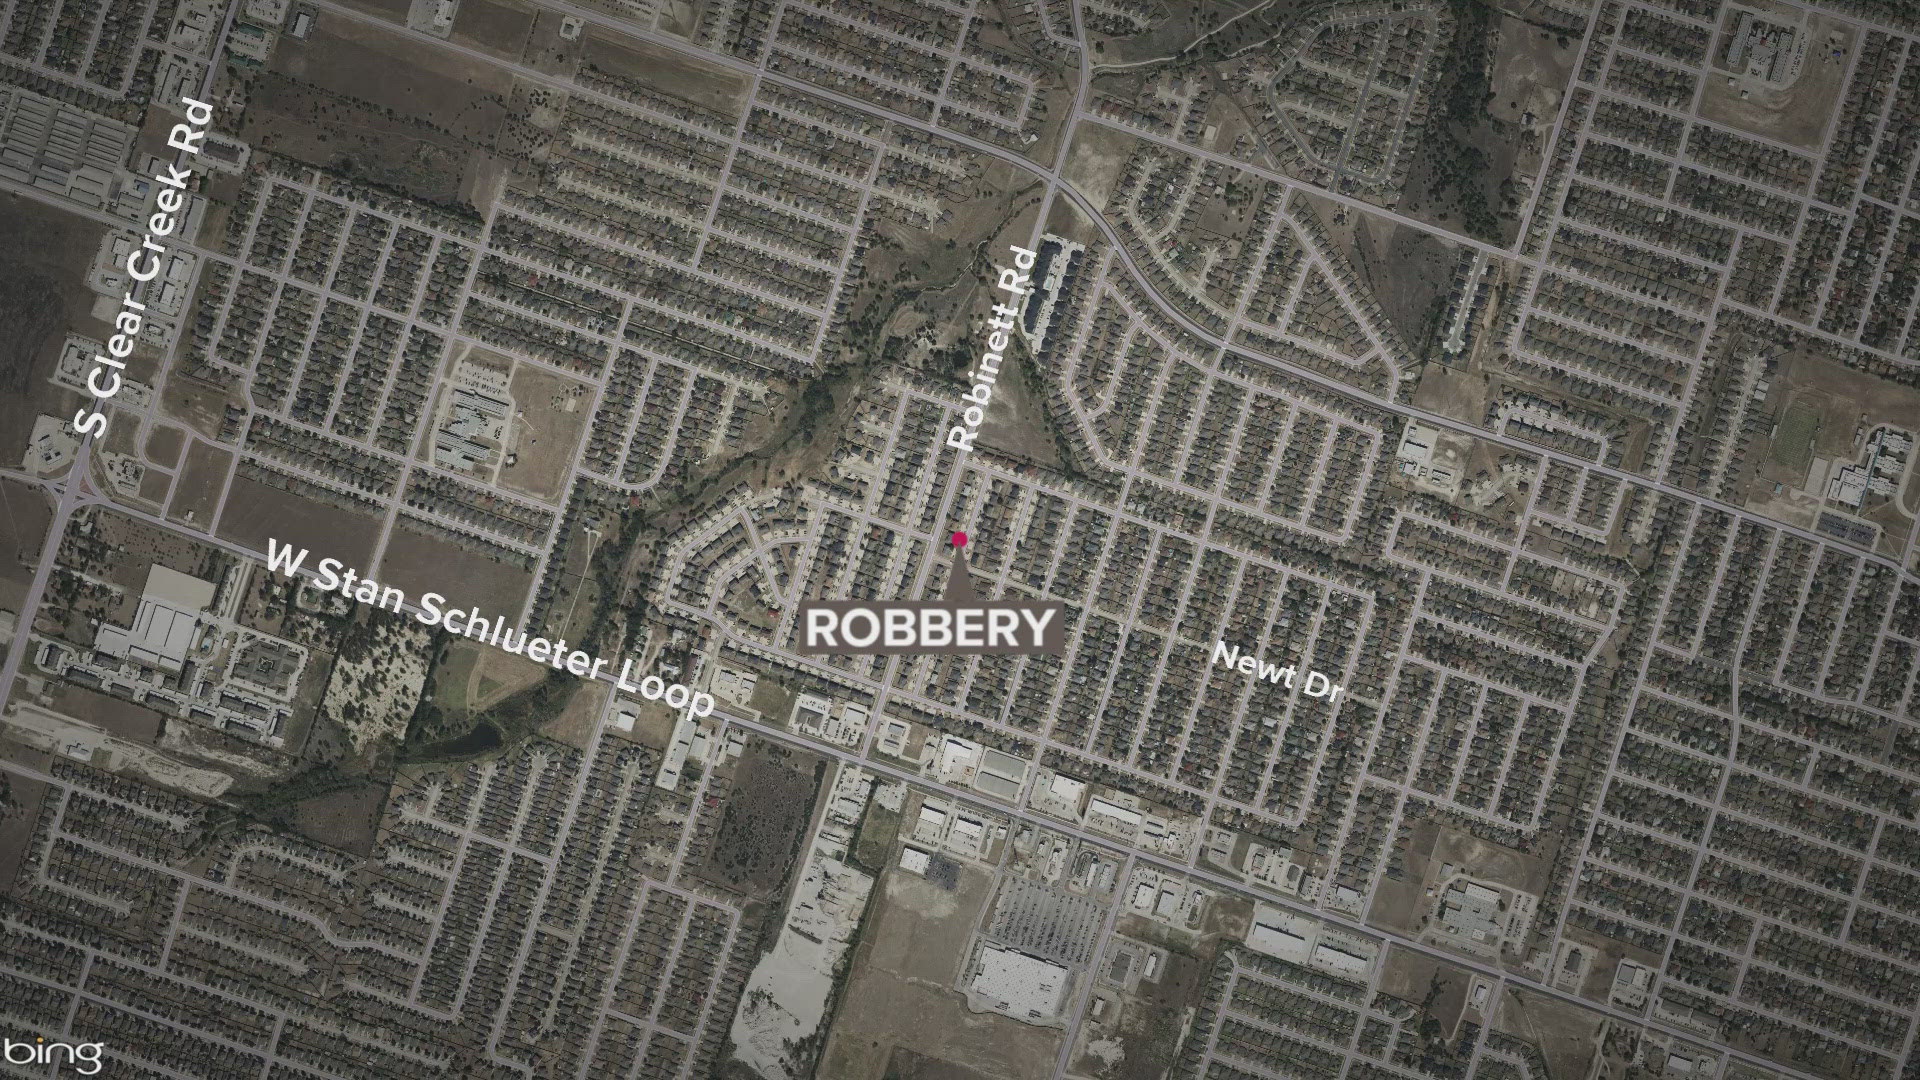 The robbery reportedly happened on May 10 at 4303 Deek Dr. around 4:43 p.m.